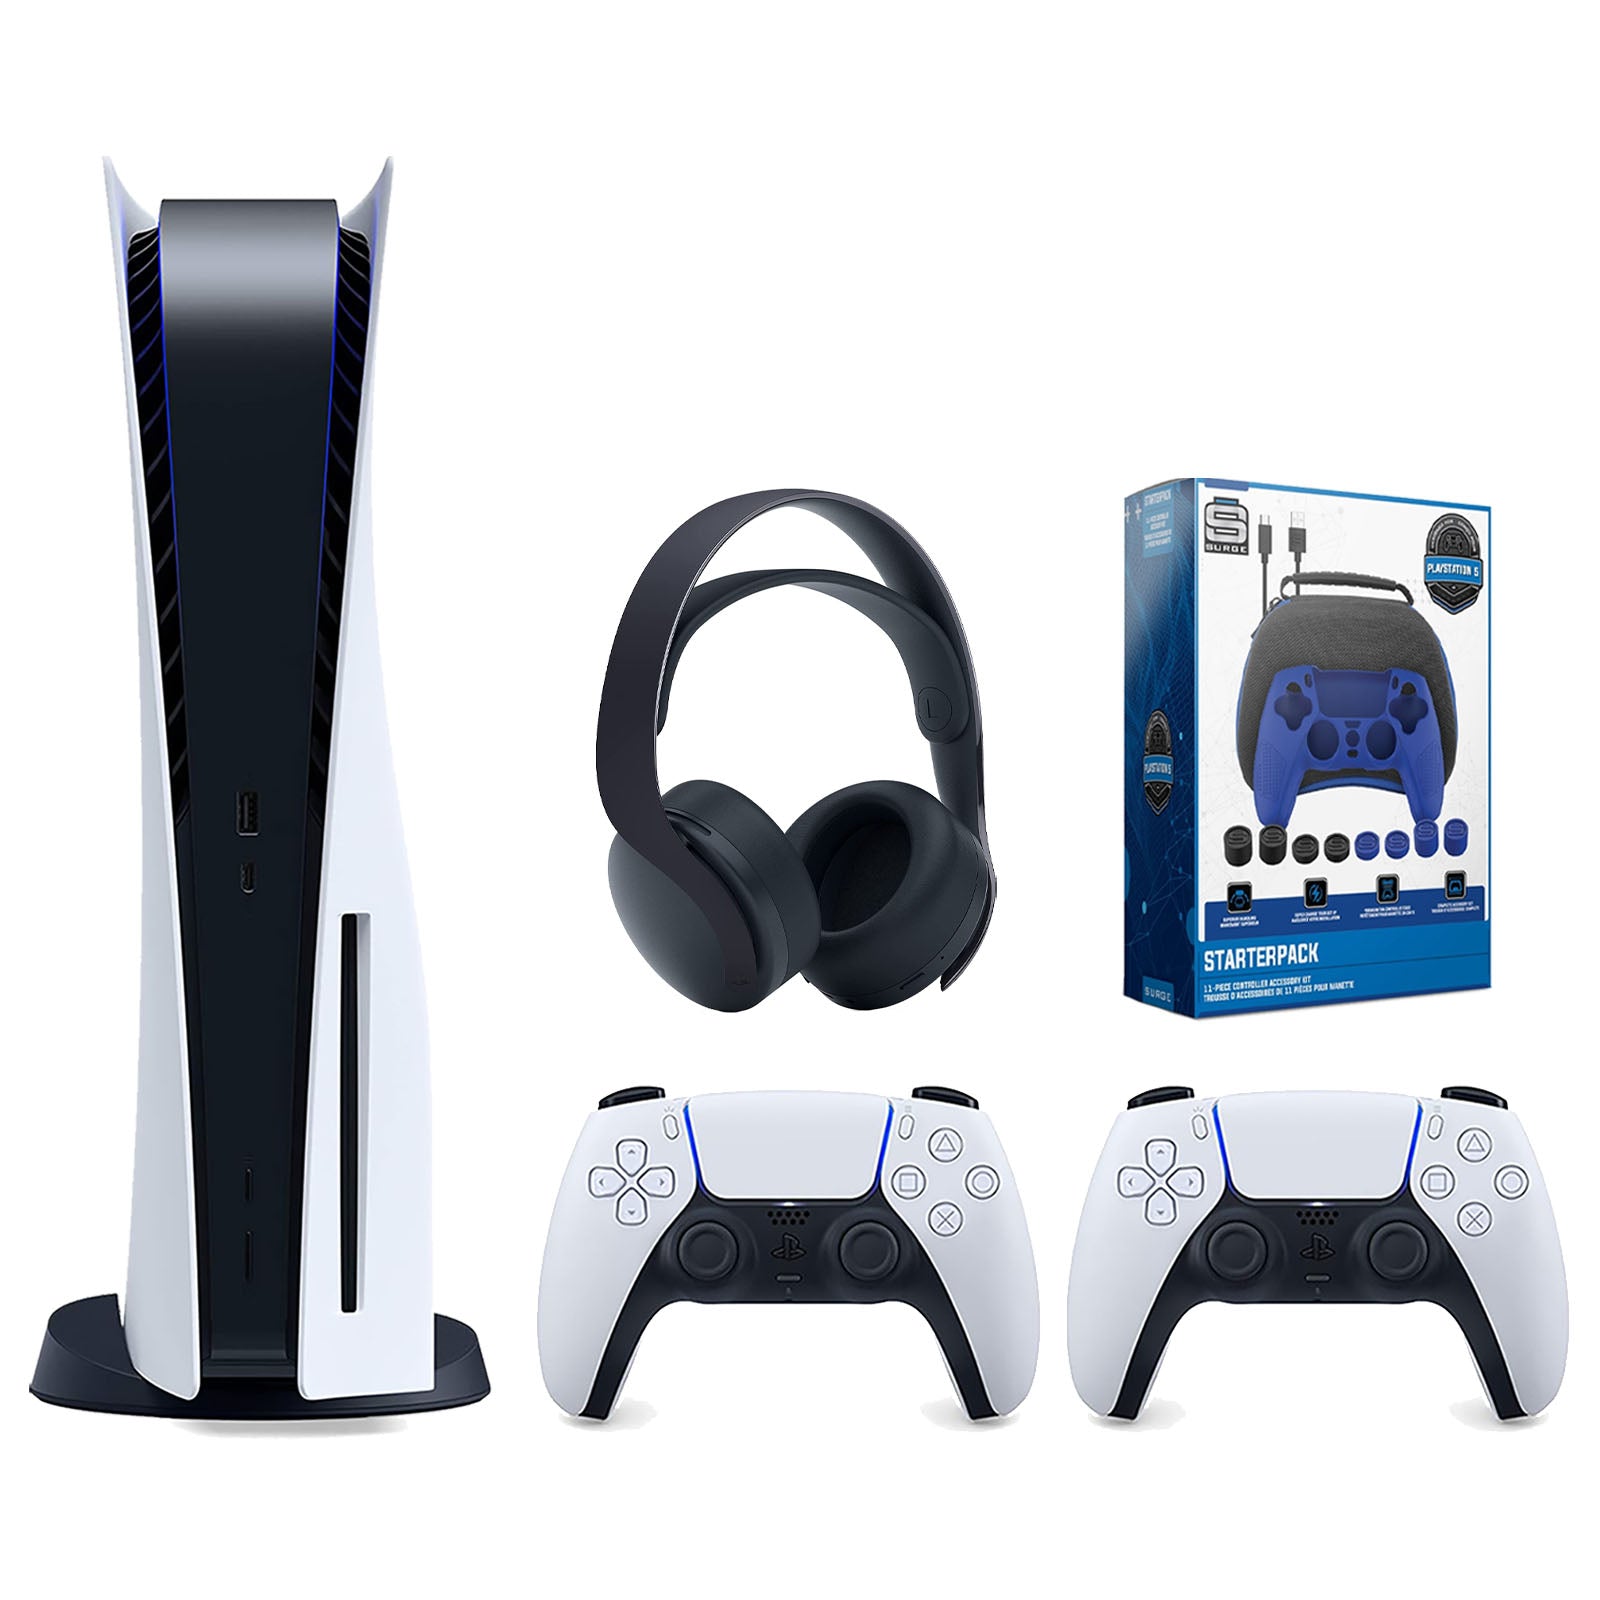 Sony Playstation 5 Disc Version Console with Extra White Controller, Black PULSE 3D Headset and Surge Pro Gamer Starter Pack 11-Piece Accessory Bundle - Pro-Distributing